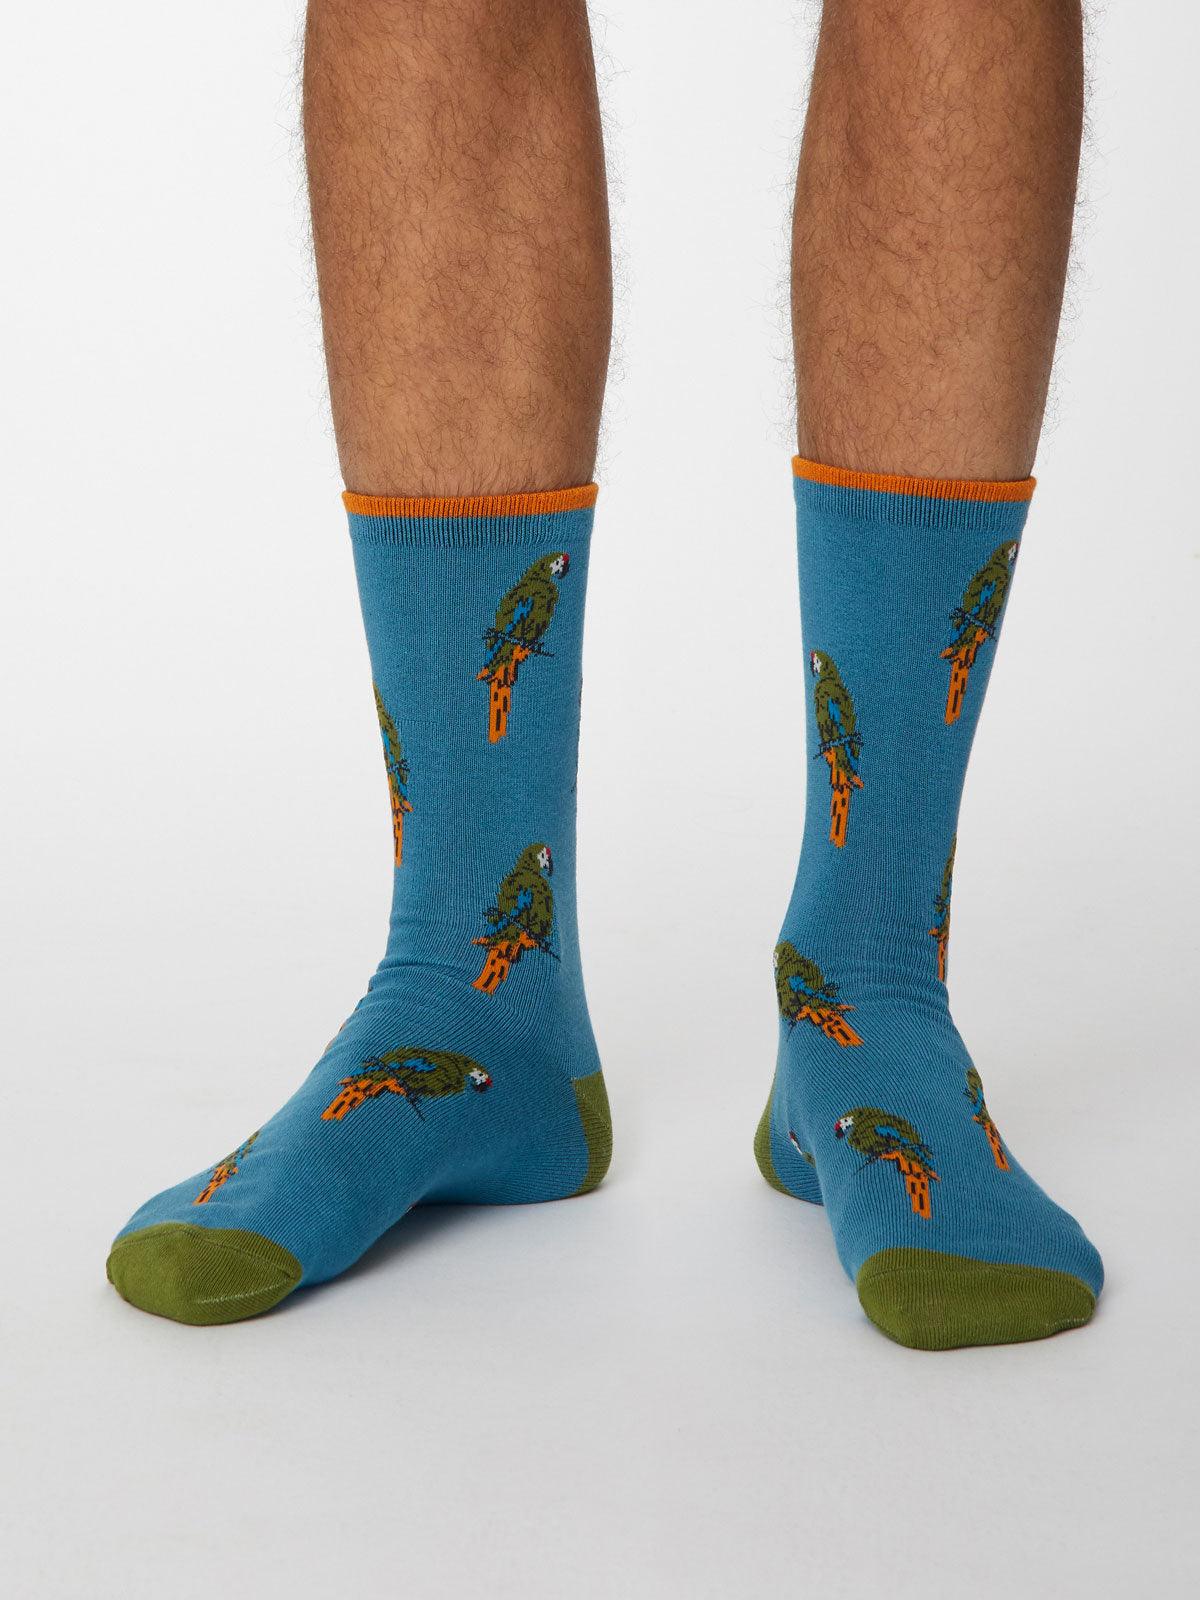 Pappagallo Socks - Dusty Blue - Thought Clothing UK